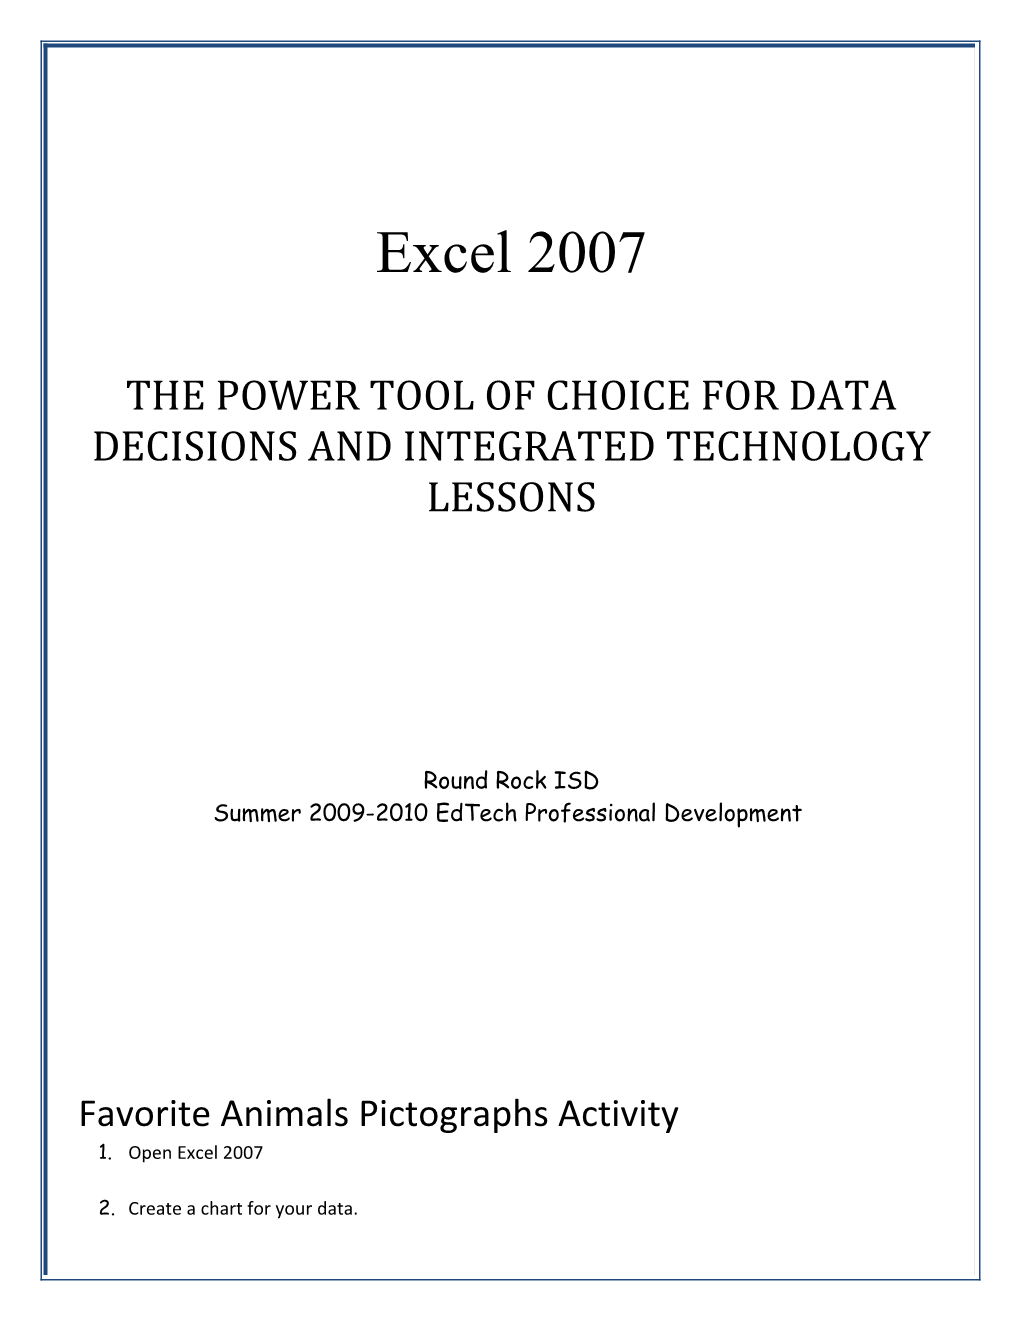 The Power Tool of Choice for Data Decisions and Integrated Technology Lessons